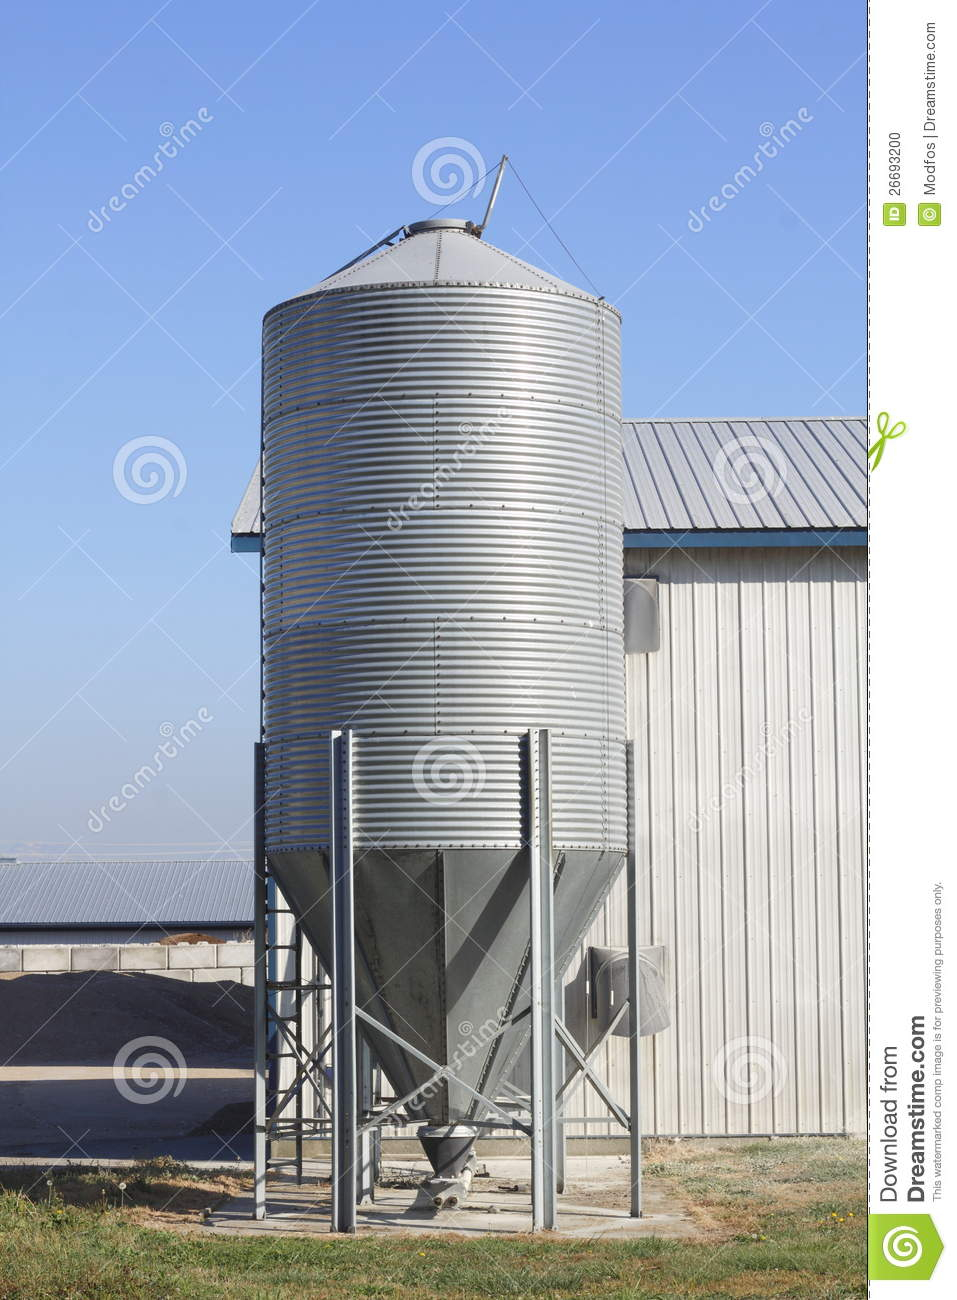 Feed Storage Bin Stock Photo Image Of Seed Animals 26693200 within proportions 957 X 1300